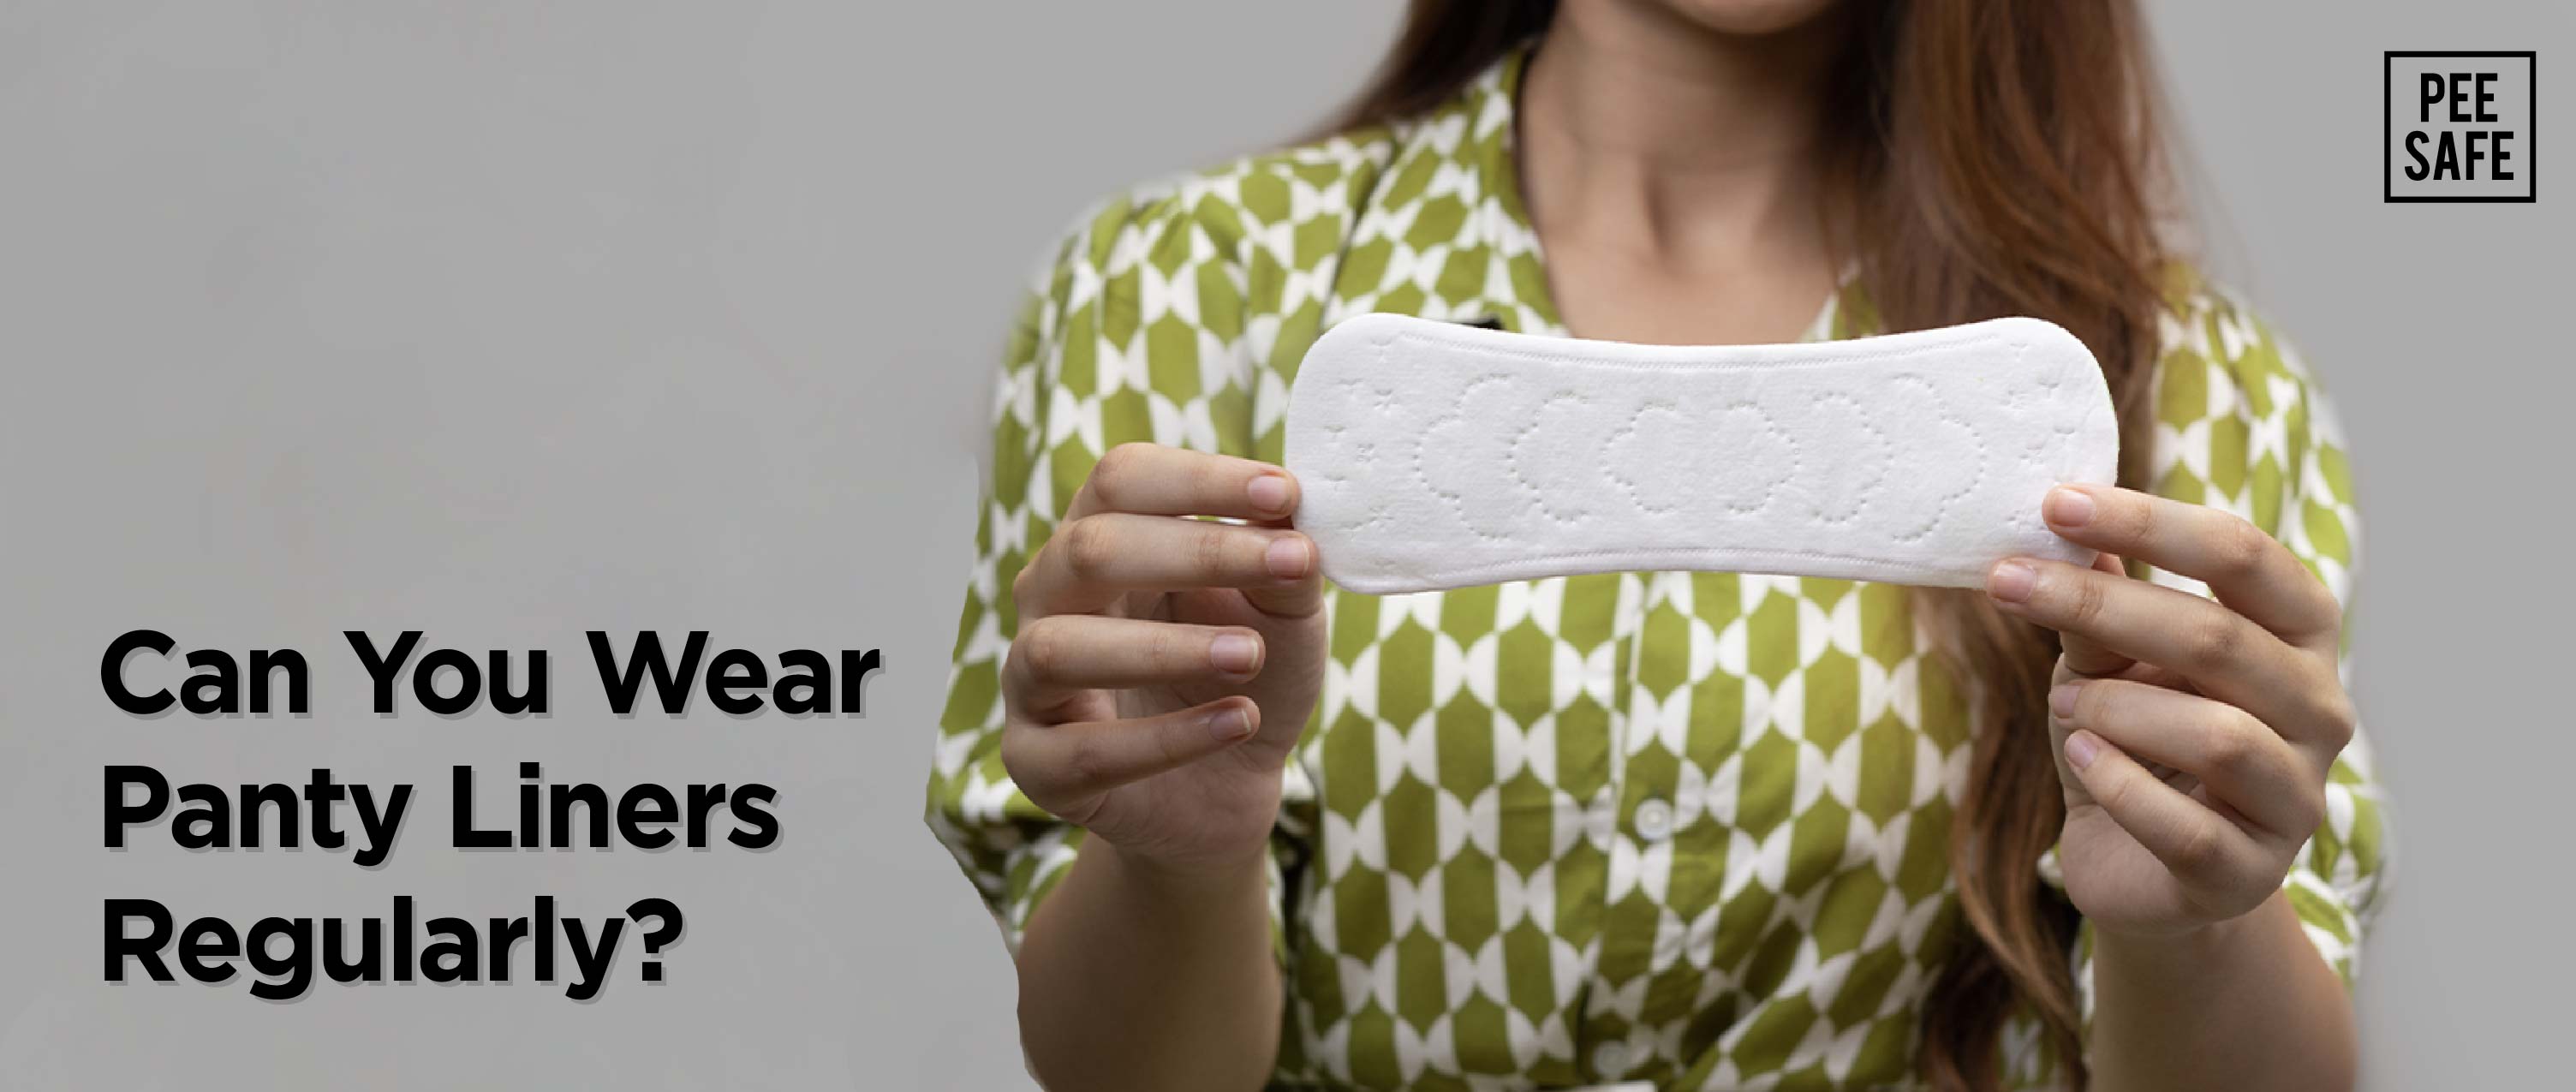 Can You Wear Panty Liners Regularly?